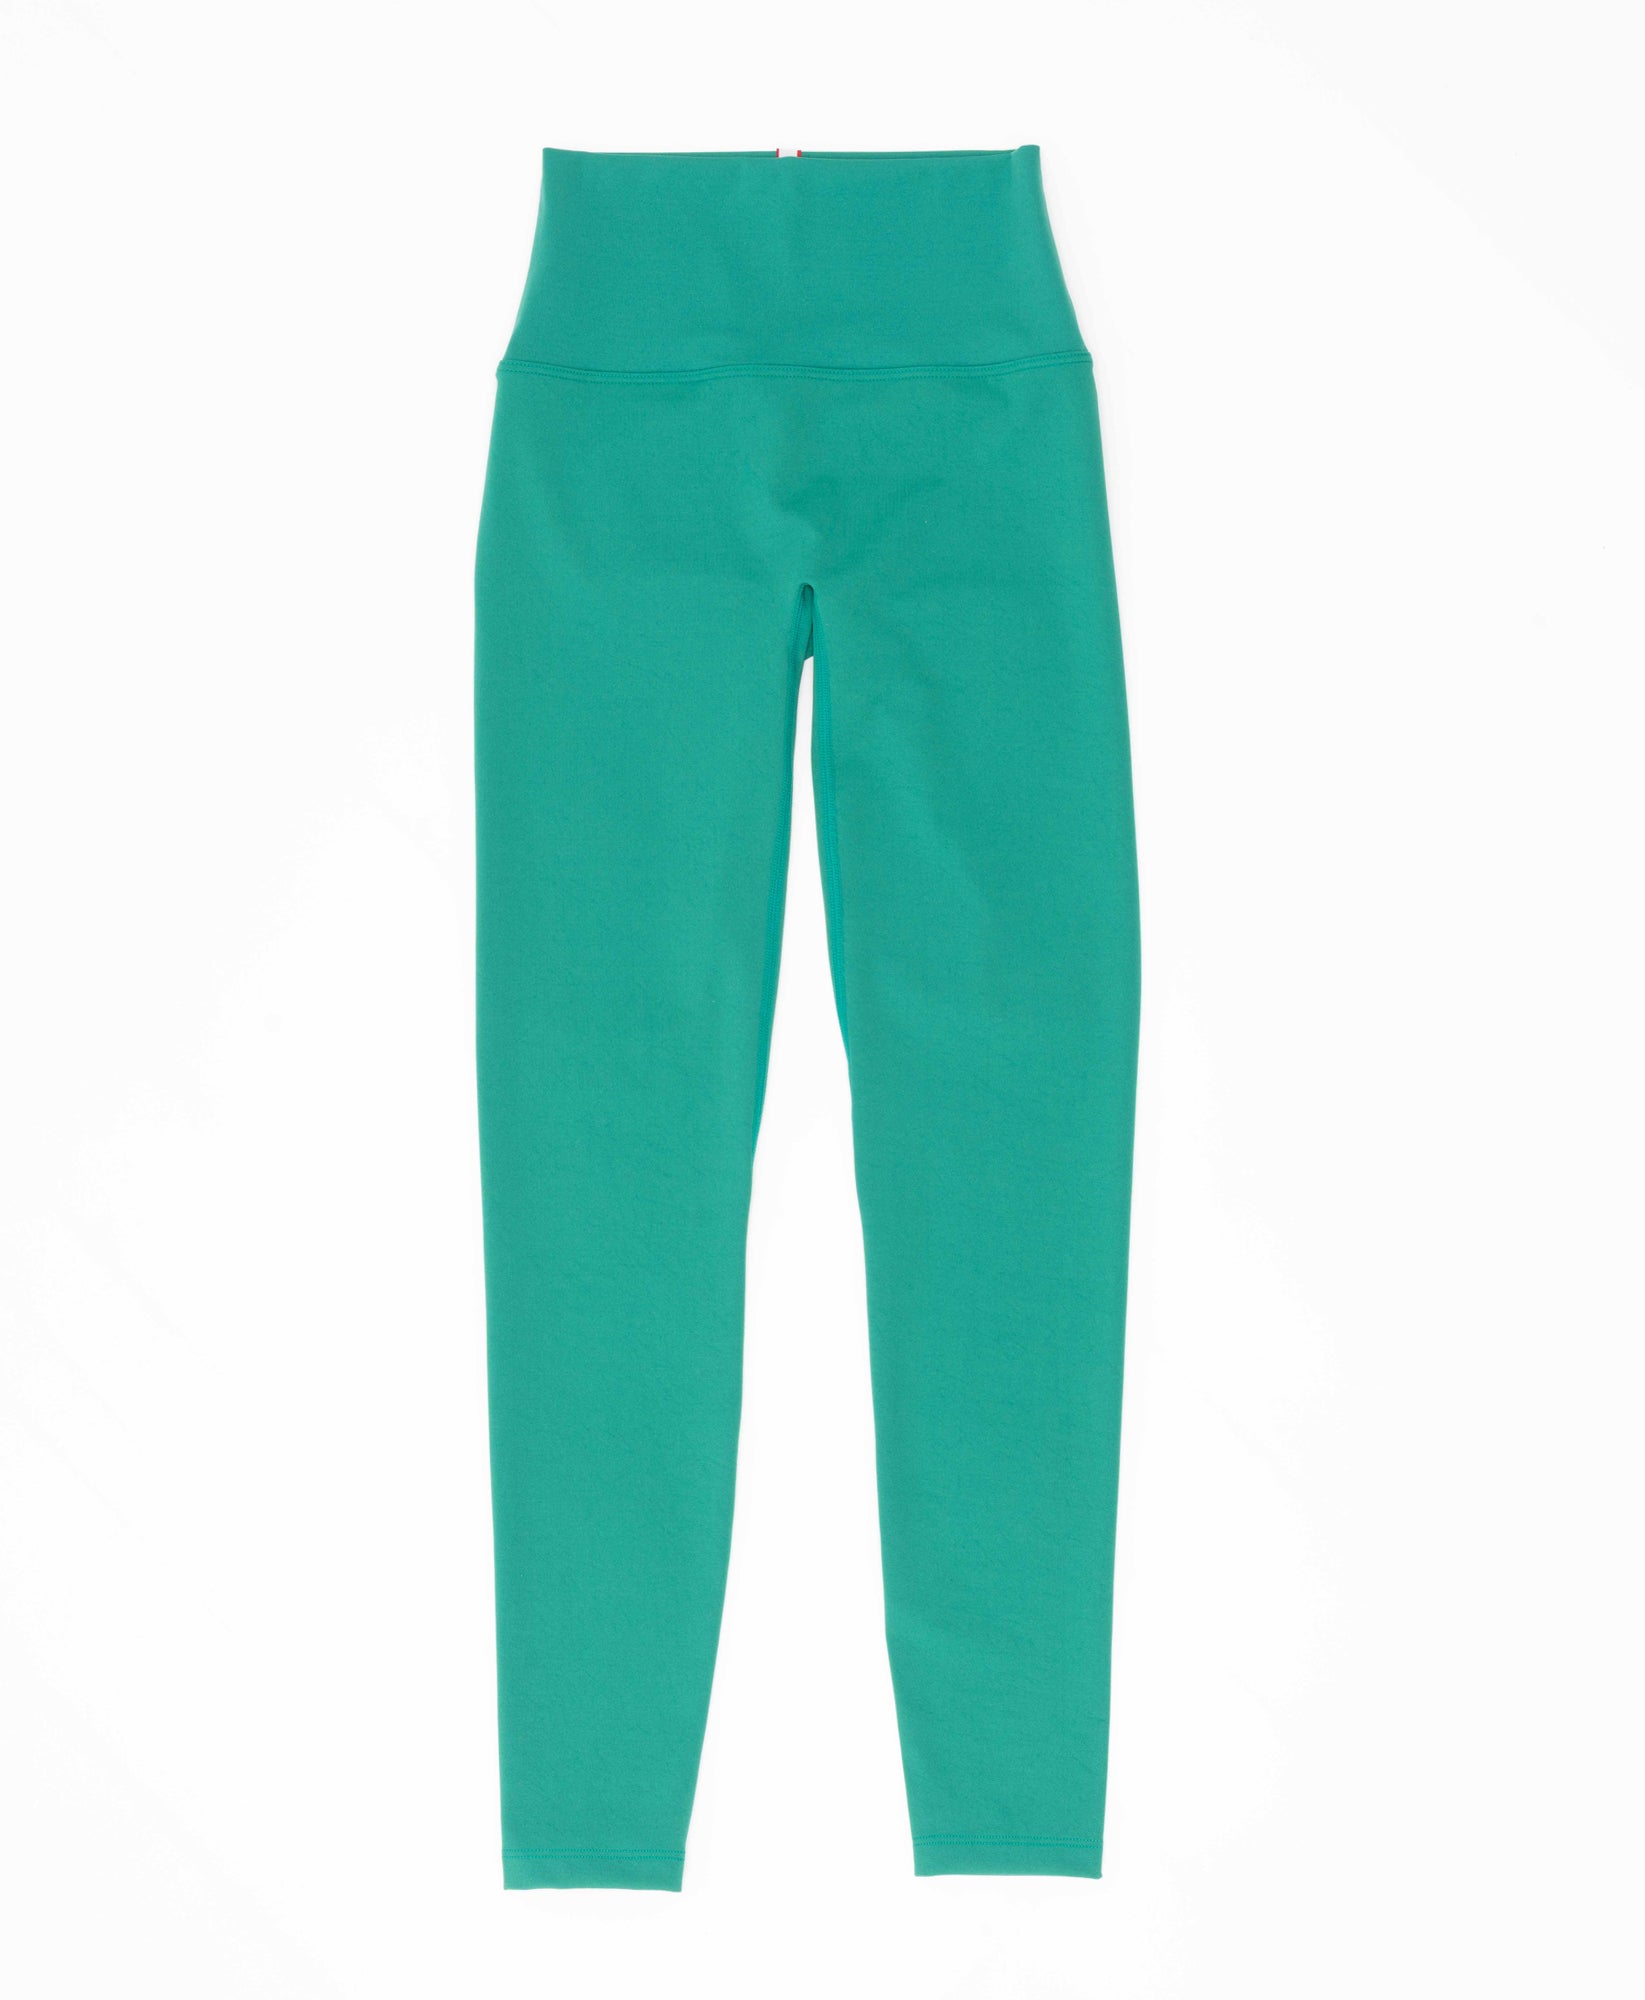 Wear One's At Routine Legging in Betty Green Flat Front